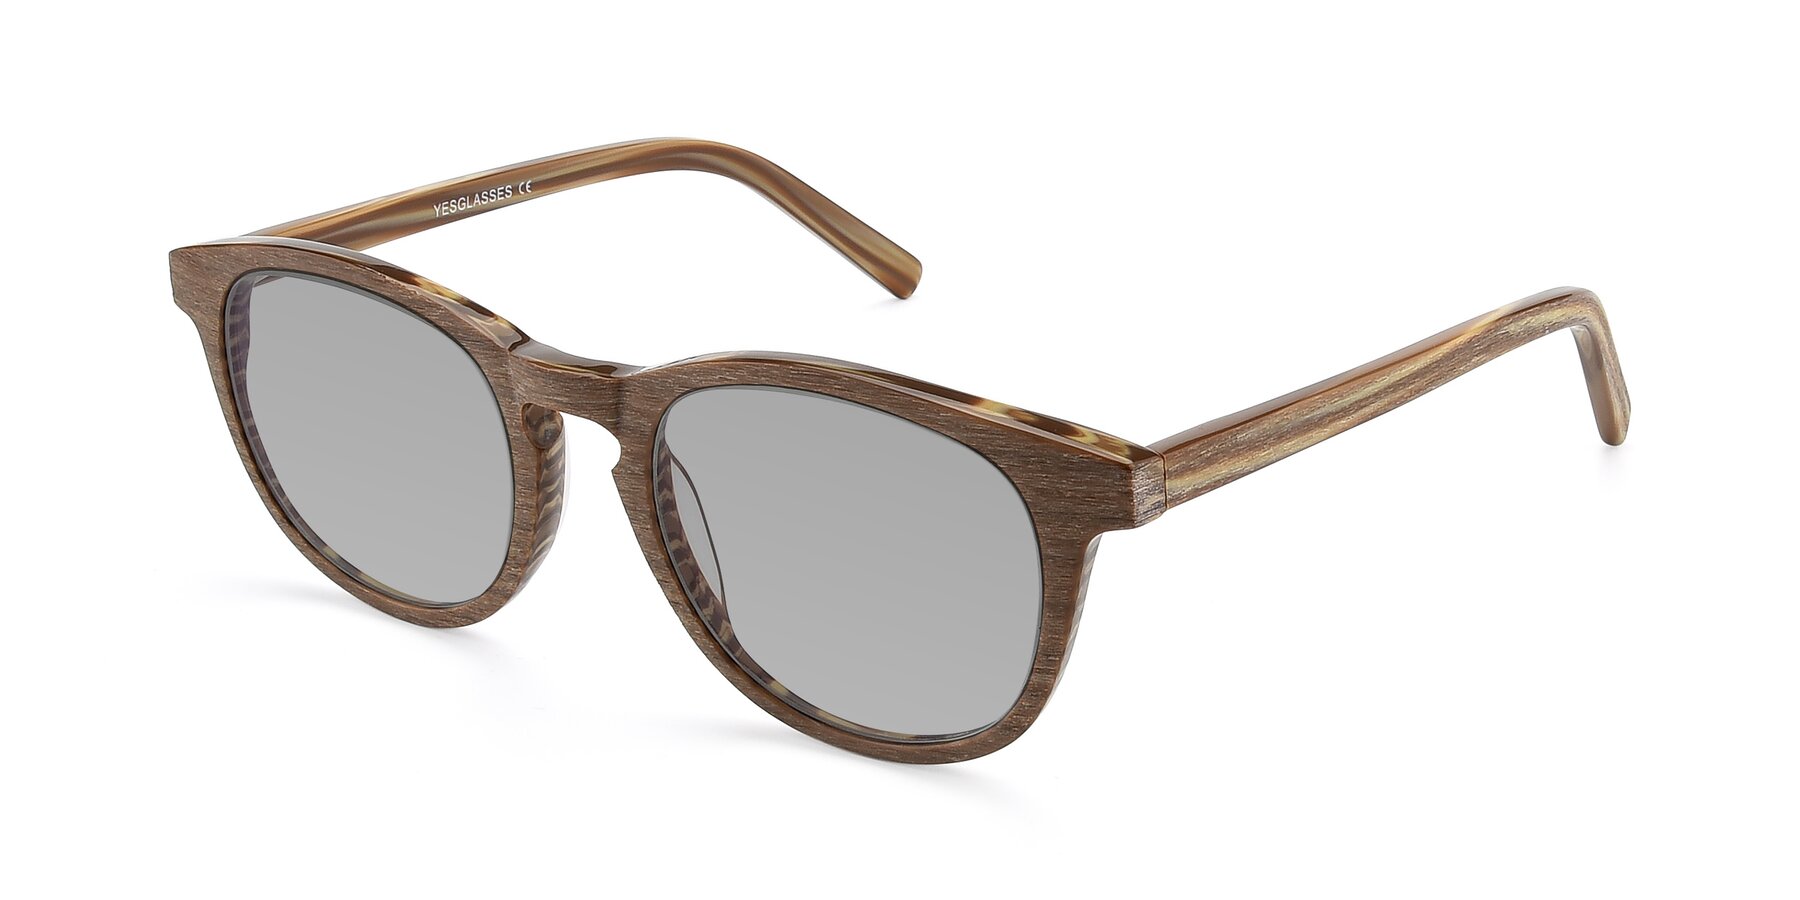 Angle of SR6044 in Brown-Wooden with Light Gray Tinted Lenses